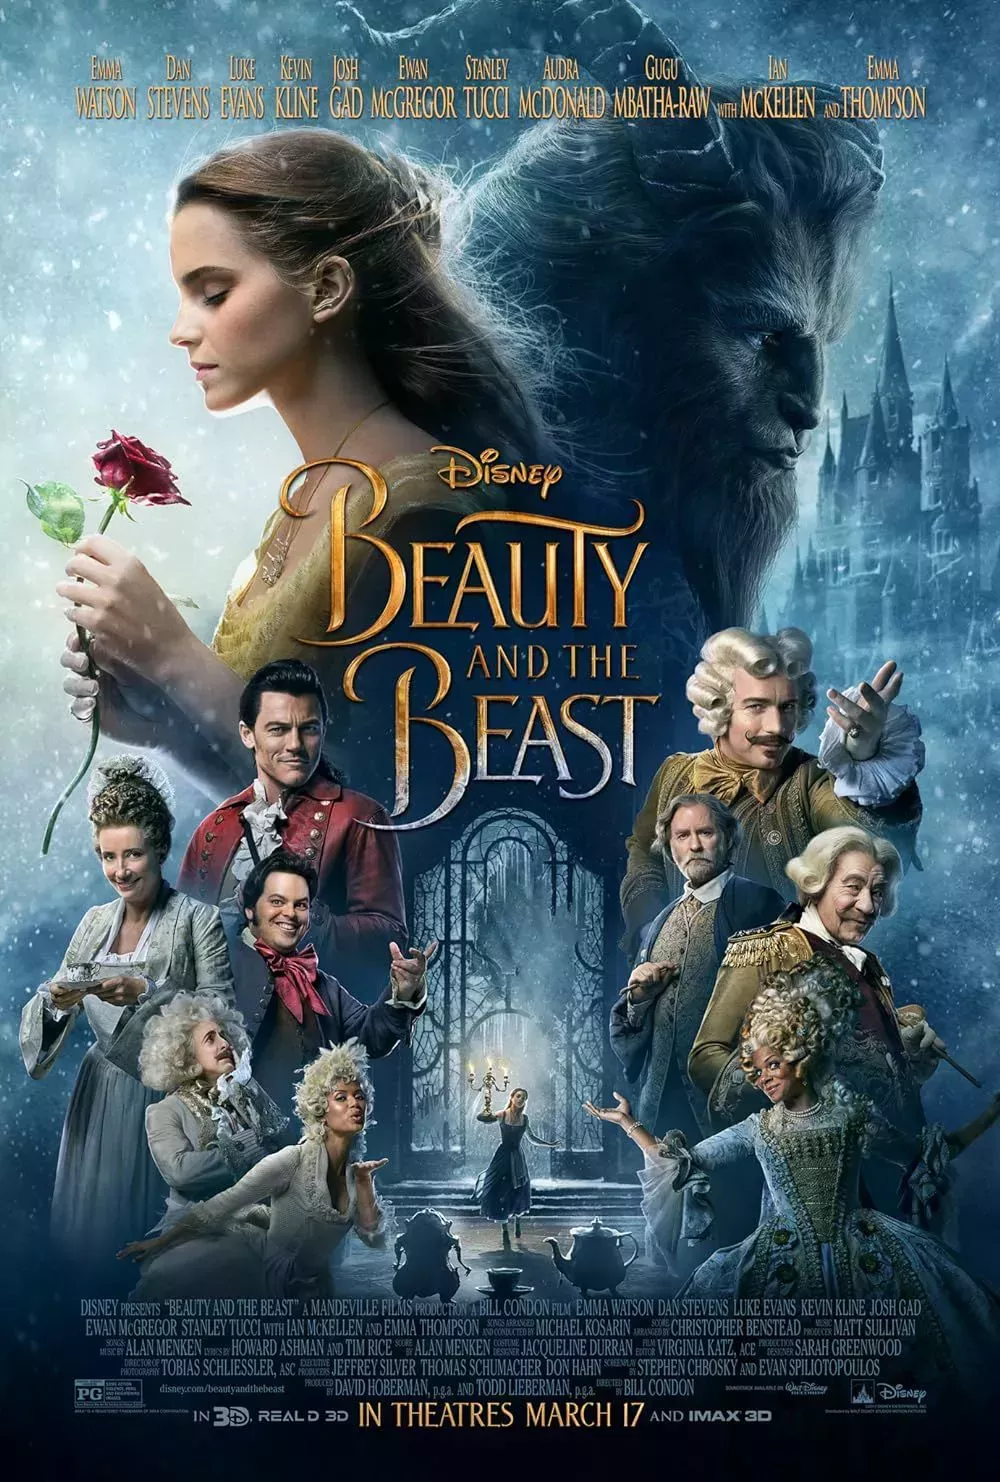 The Cast on the Live Action Beauty and the Beast Poster